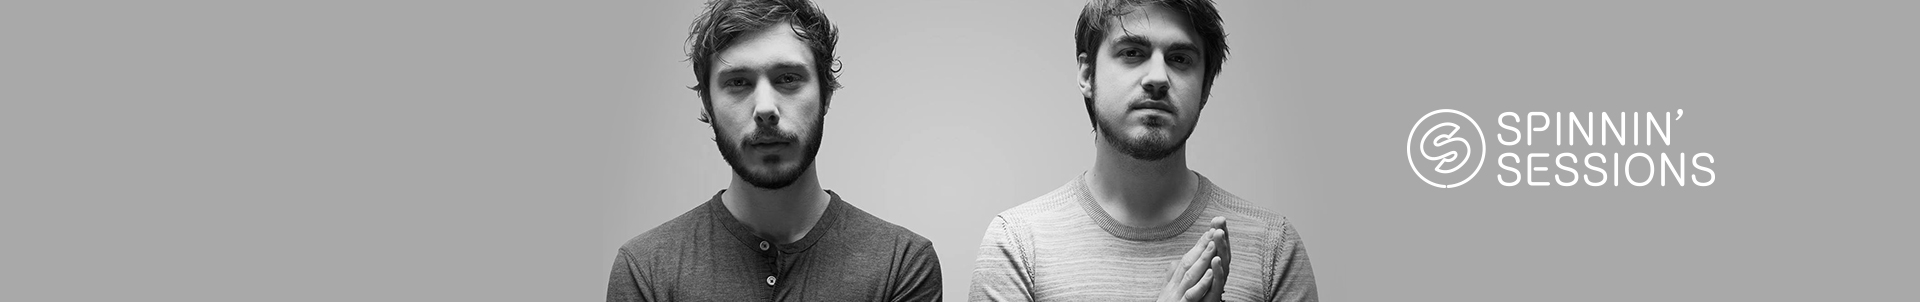 Check out Spinnin' Sessions with Vicetone